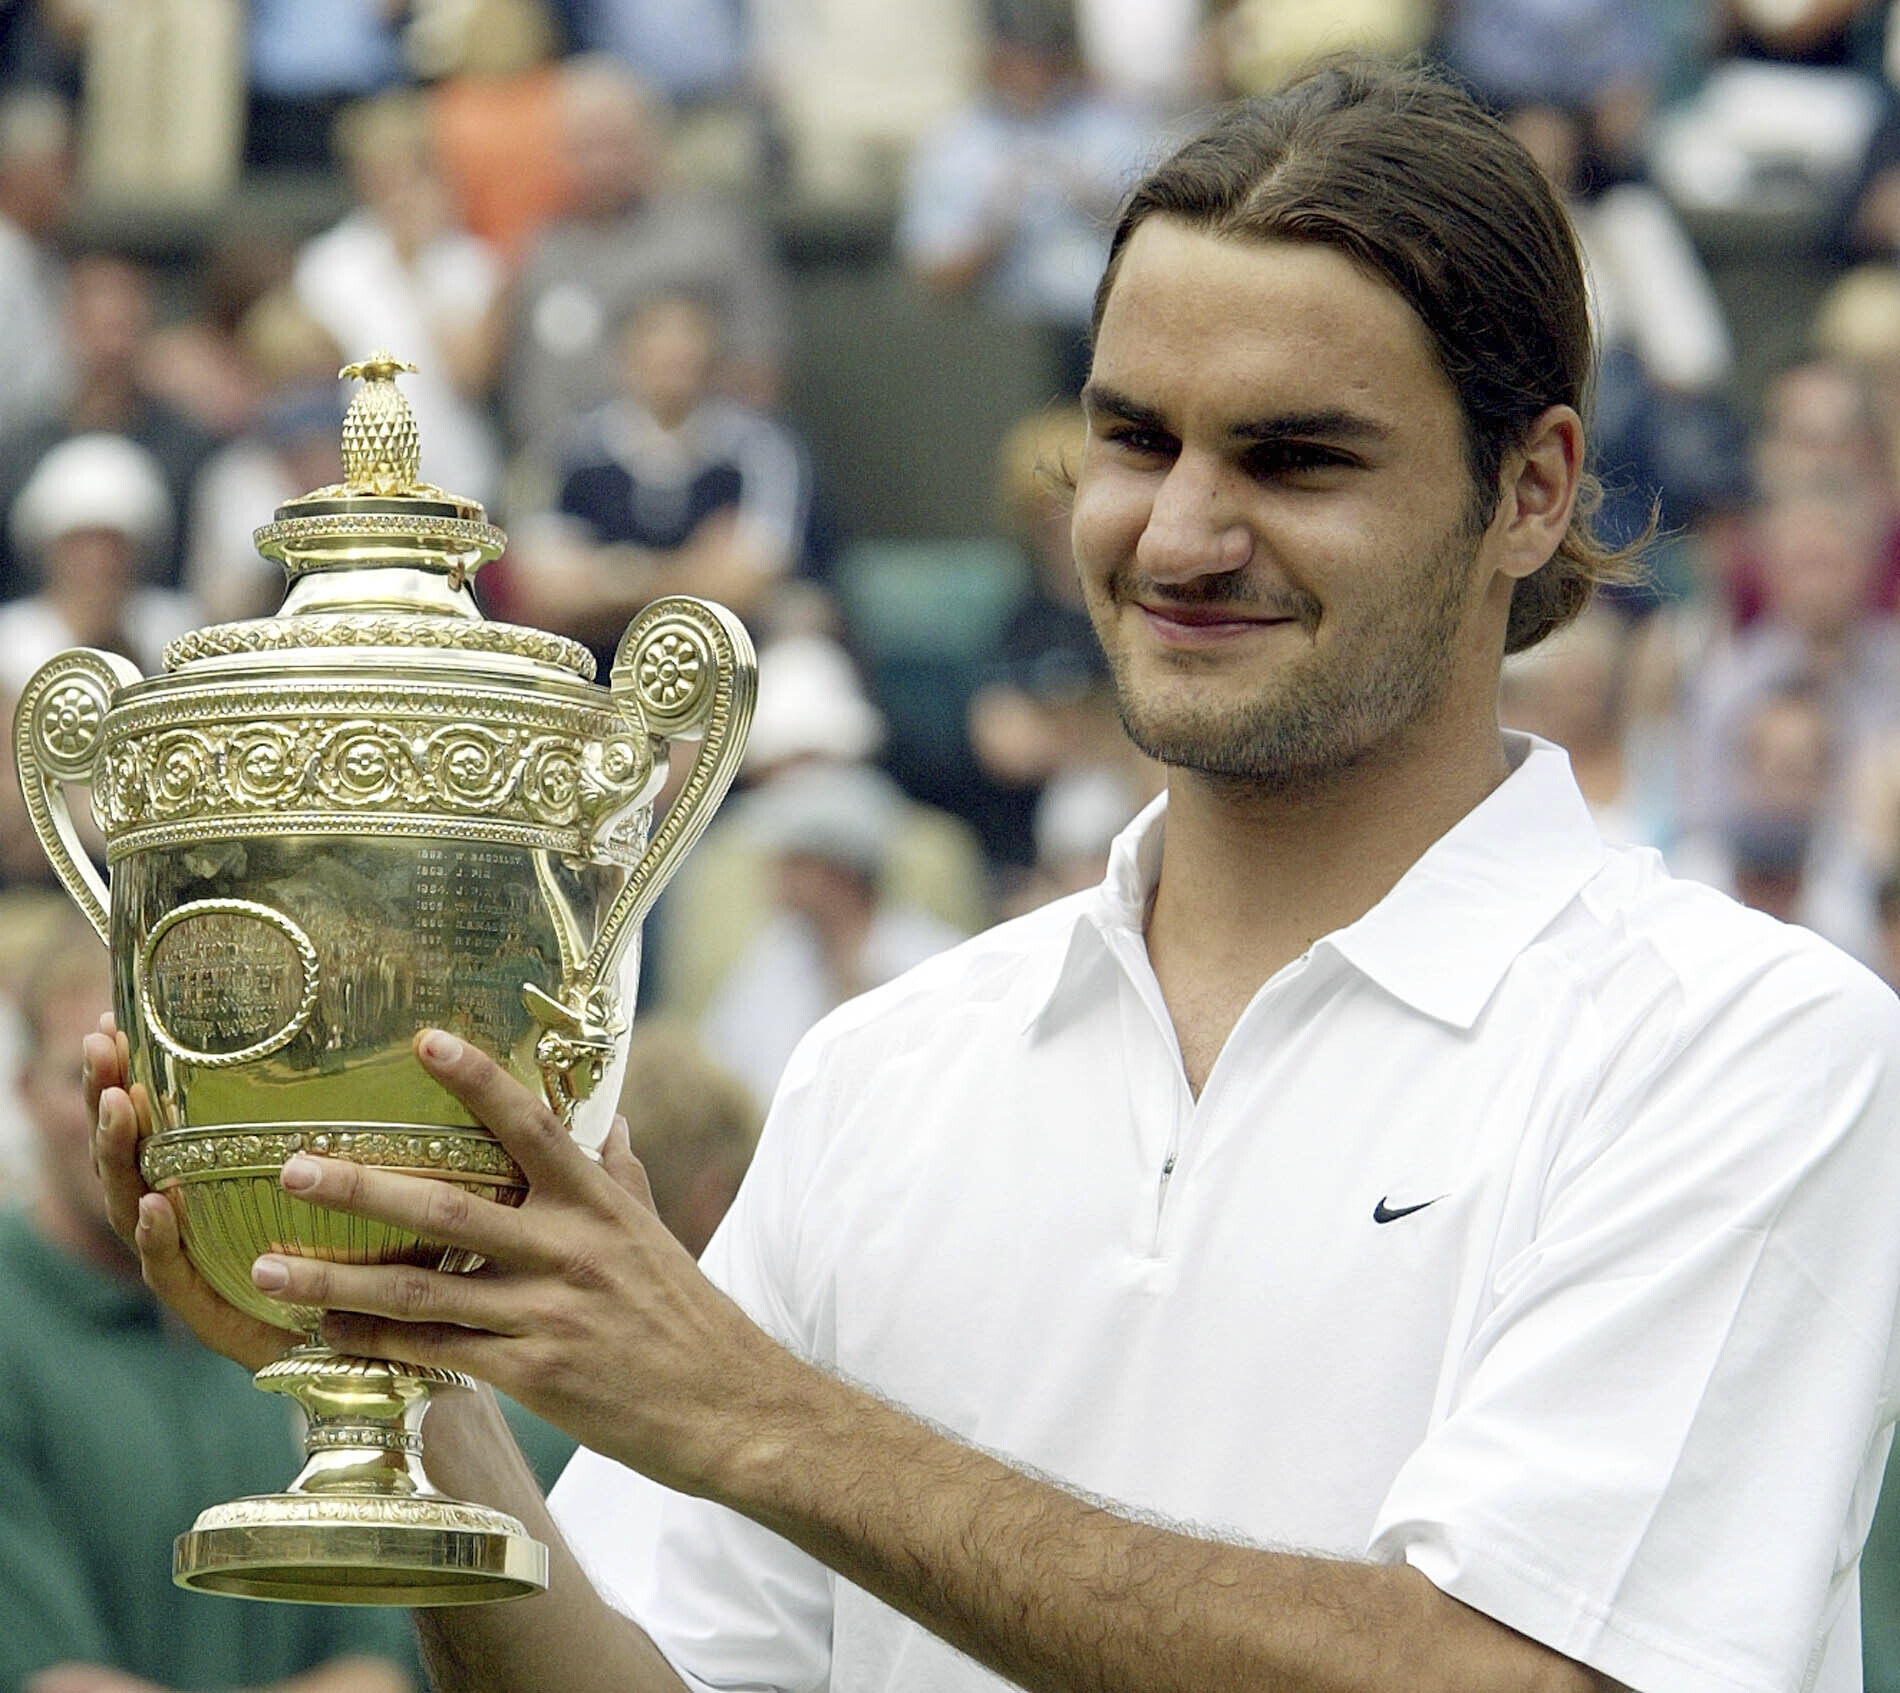 Switzerland’s Roger Federer holds the men’s singles trophy after defeating Australia’s Mark Philippoussis in the 2003 Wimbledon final. Photo: AP